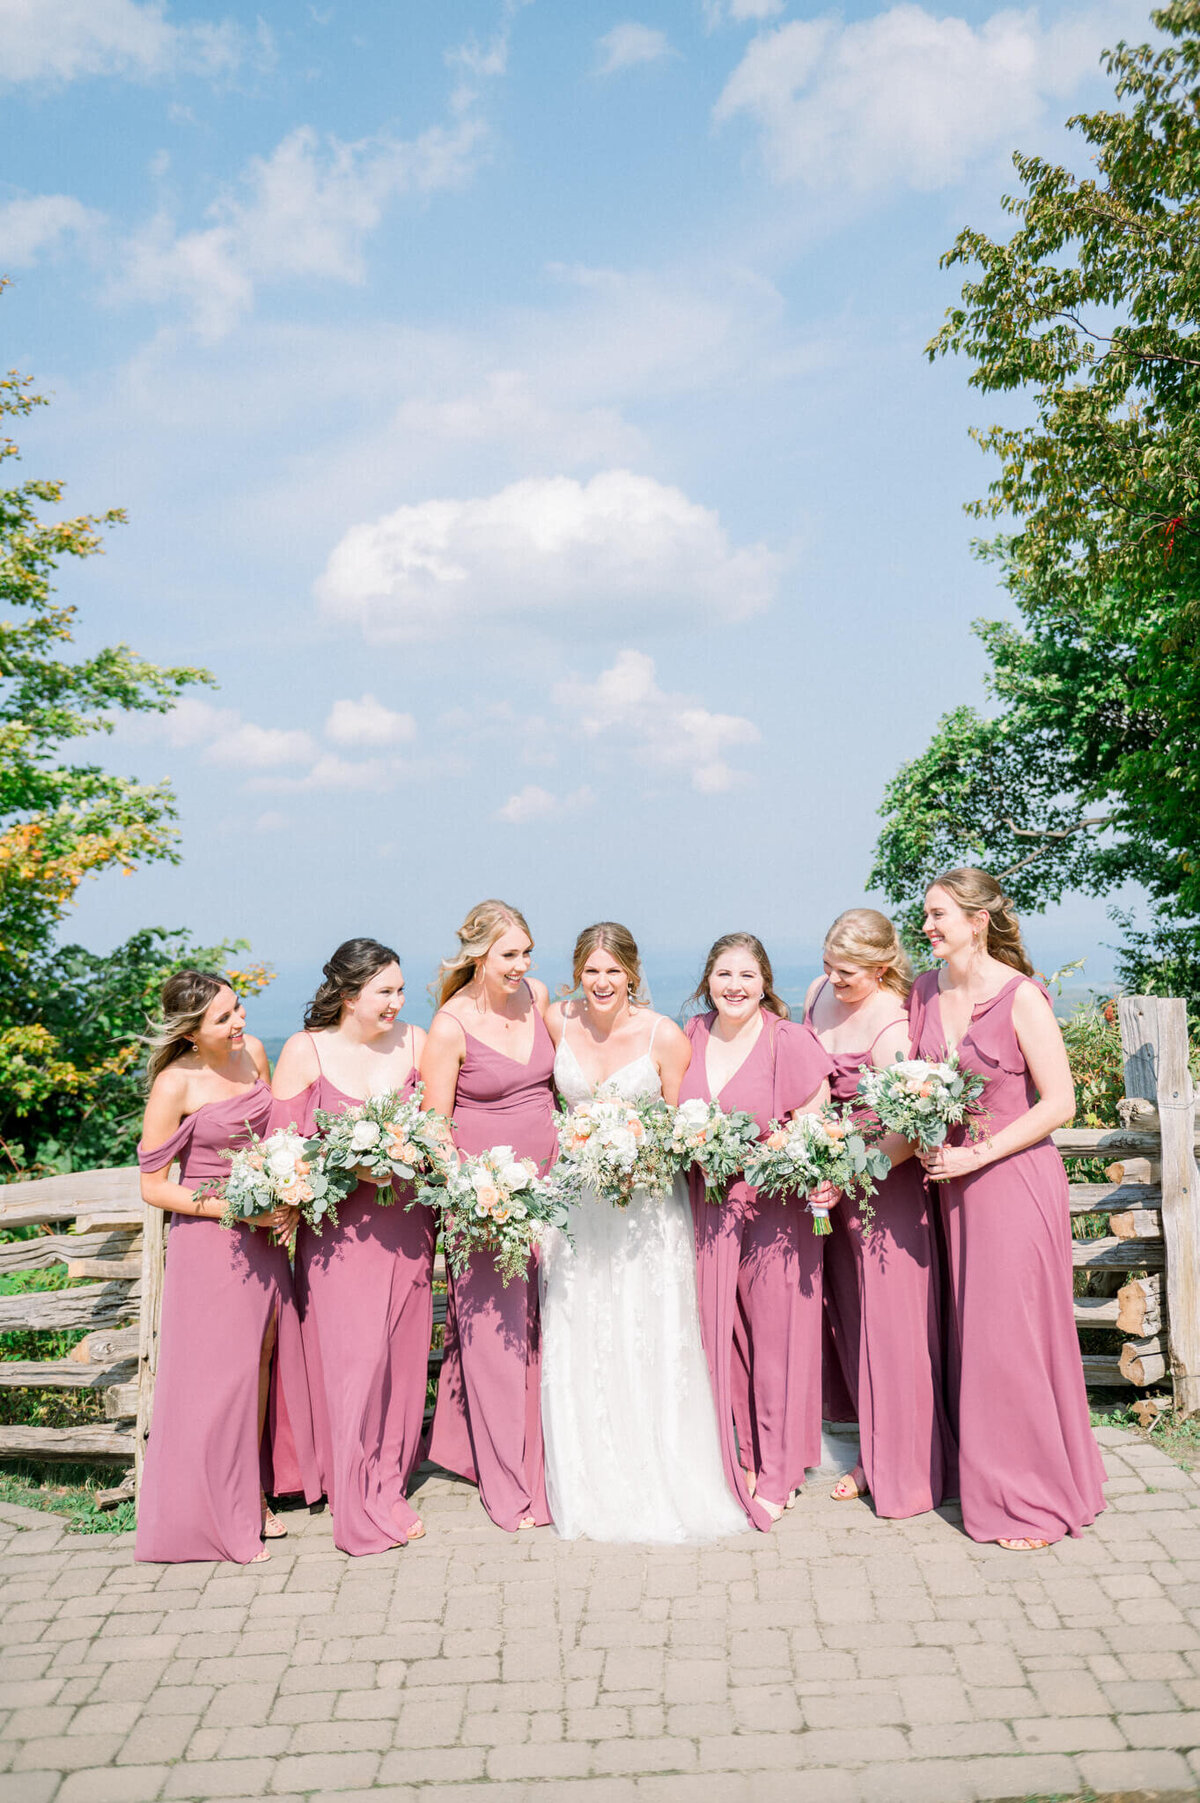 Bridesmaids holding flowers looking at bride